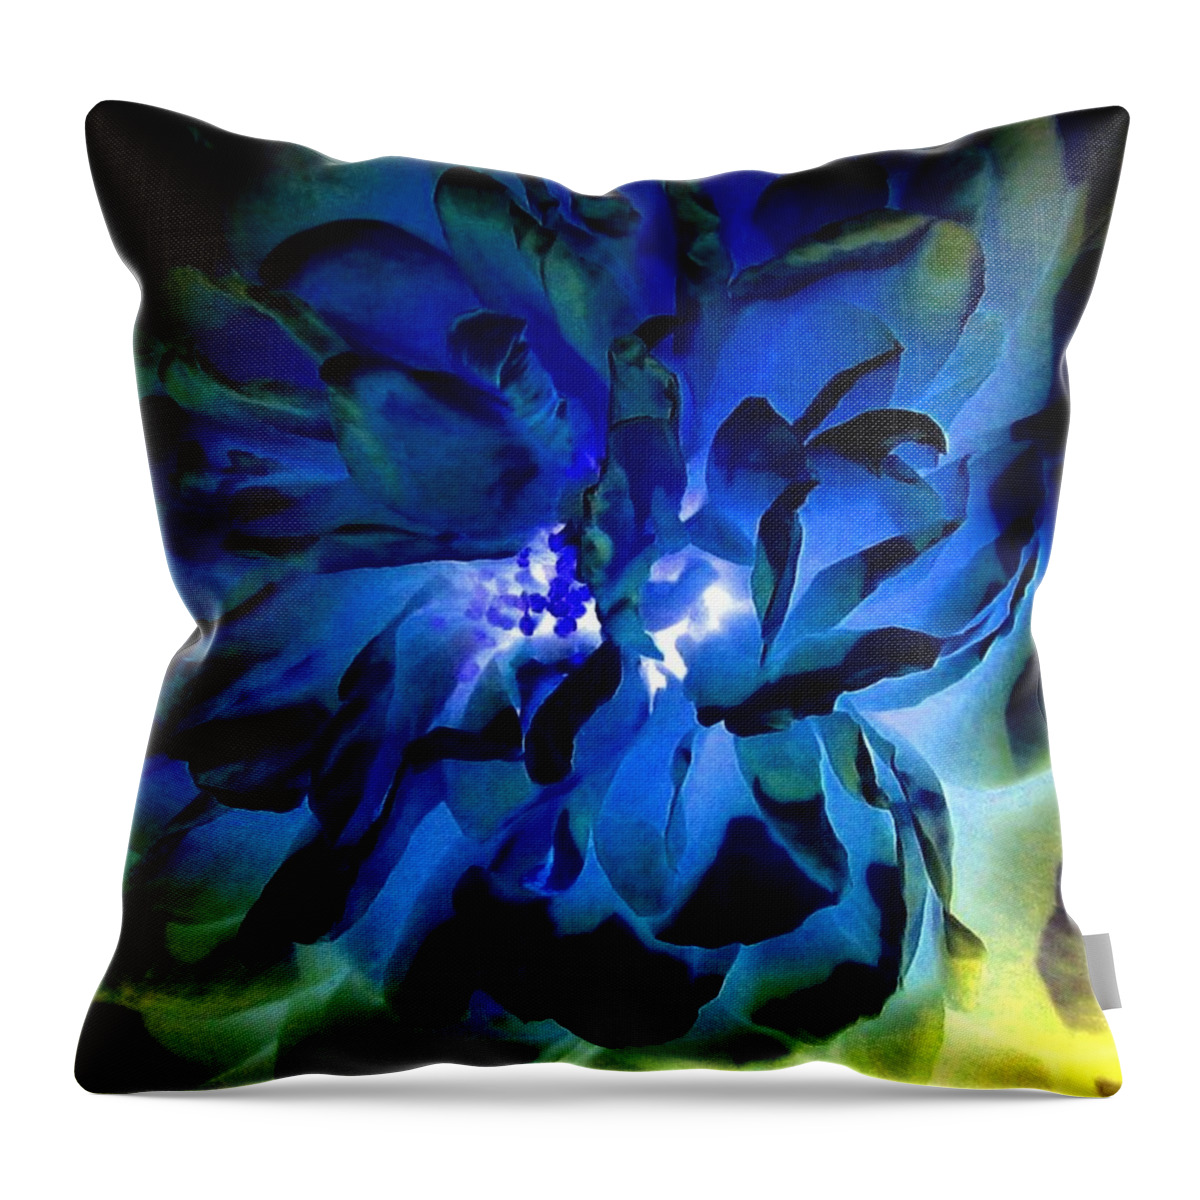 Abstract Throw Pillow featuring the digital art Midnight Blue Rose by Will Borden